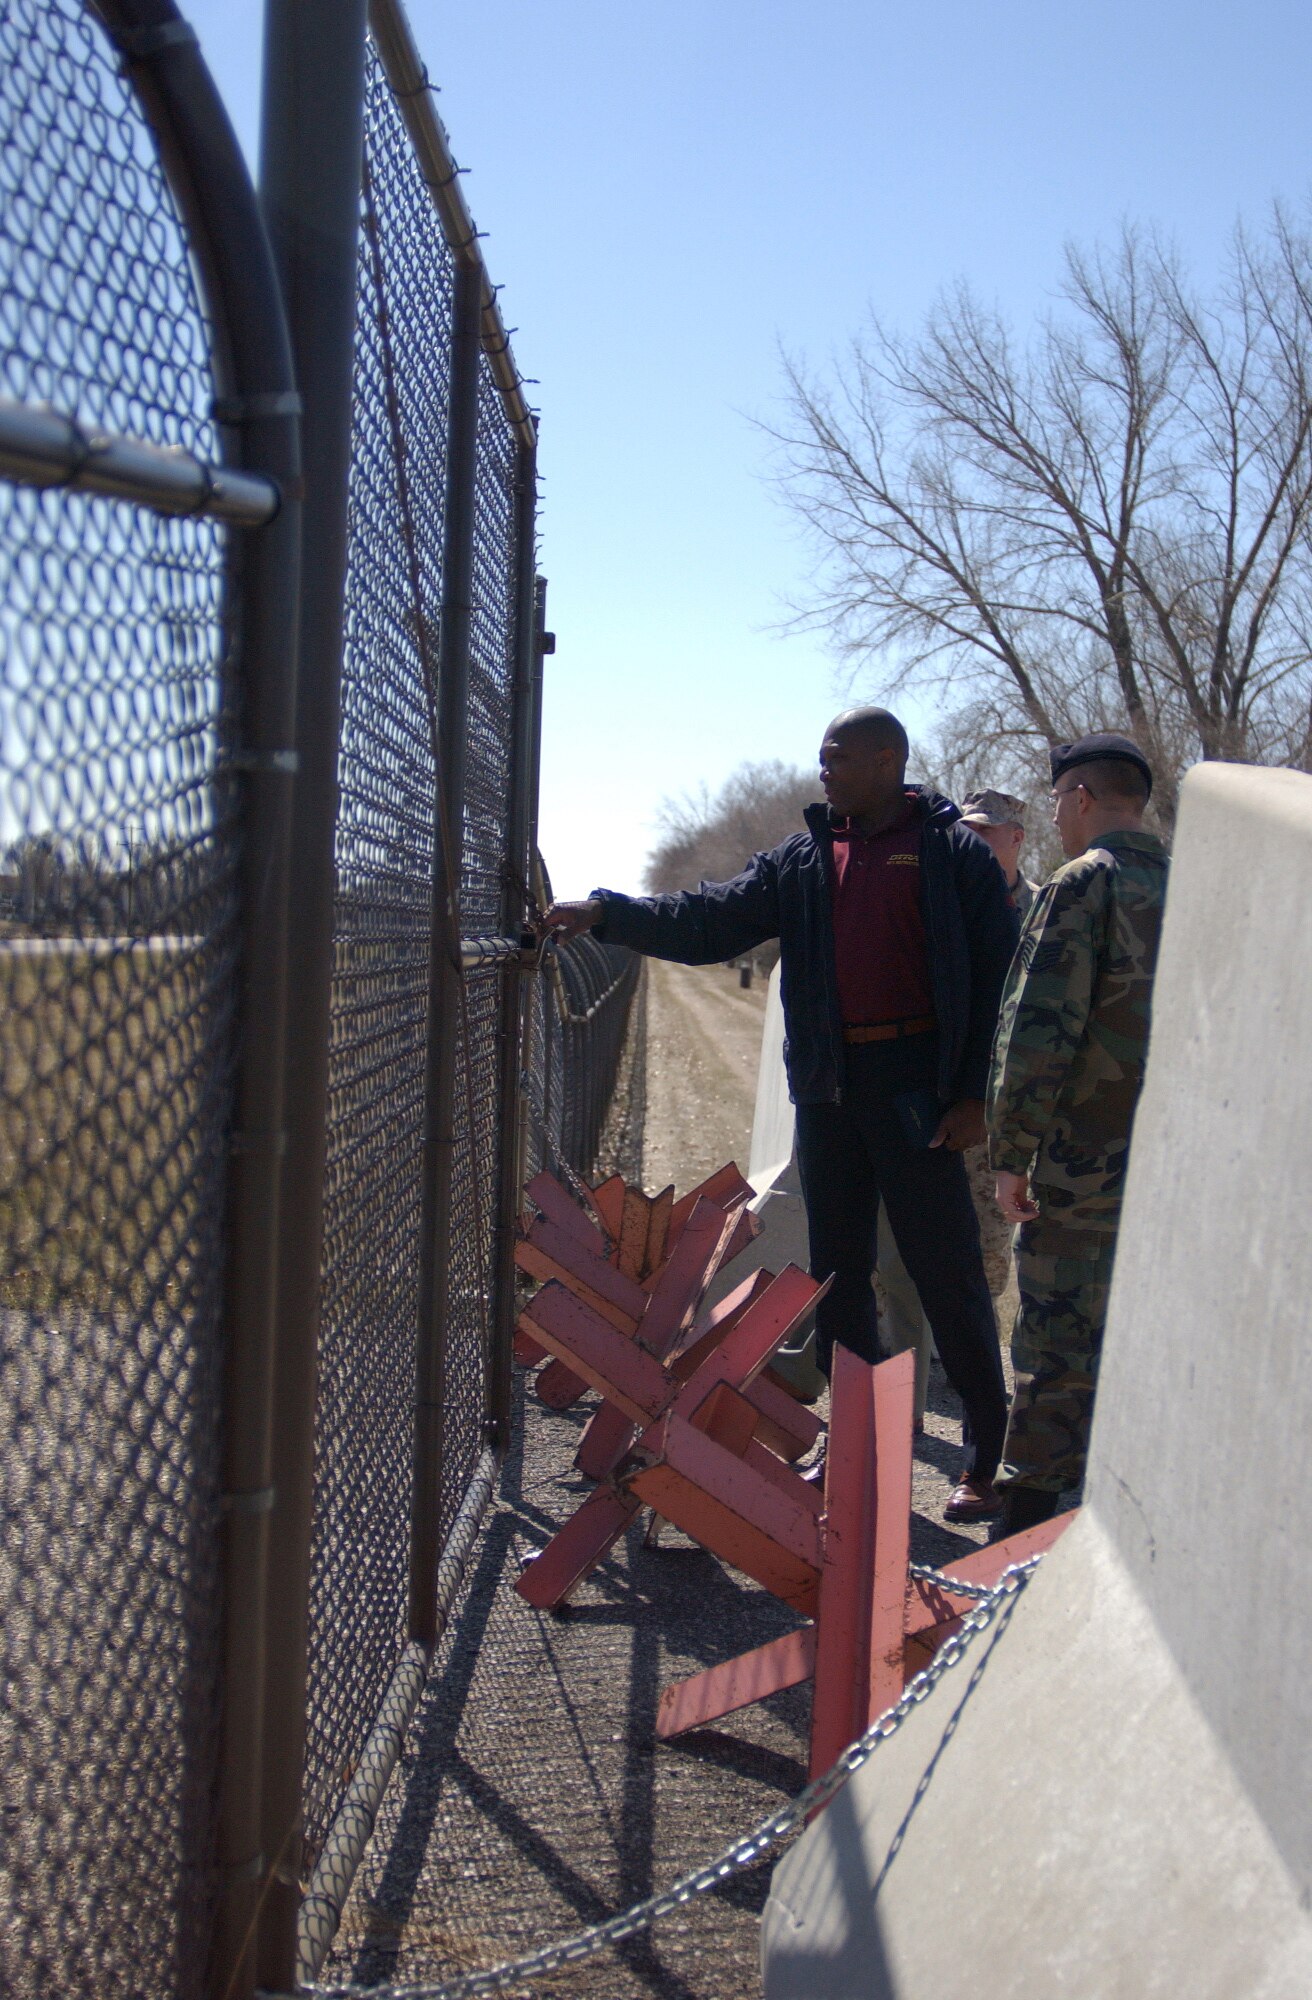 GRAND FORKS AIR FORCE BASE, N.D. ? Mr. Marion Andrews, an instructor with the Defense Threat Reduction Agency, inspects a barricaded, unused gate here April 19 during a field exercise as part of a five-day conference.  More than 93 instructors and students (enlisted, officers and civilians from every branch of the military) were here for an anti-terrorism, threat-reduction conference that covered terrorist options, security operations, structural engineering and security engineering, infrastructure engineering and emergency management.  (U.S. Air Force photo/Senior Airman J. Paul Croxon)